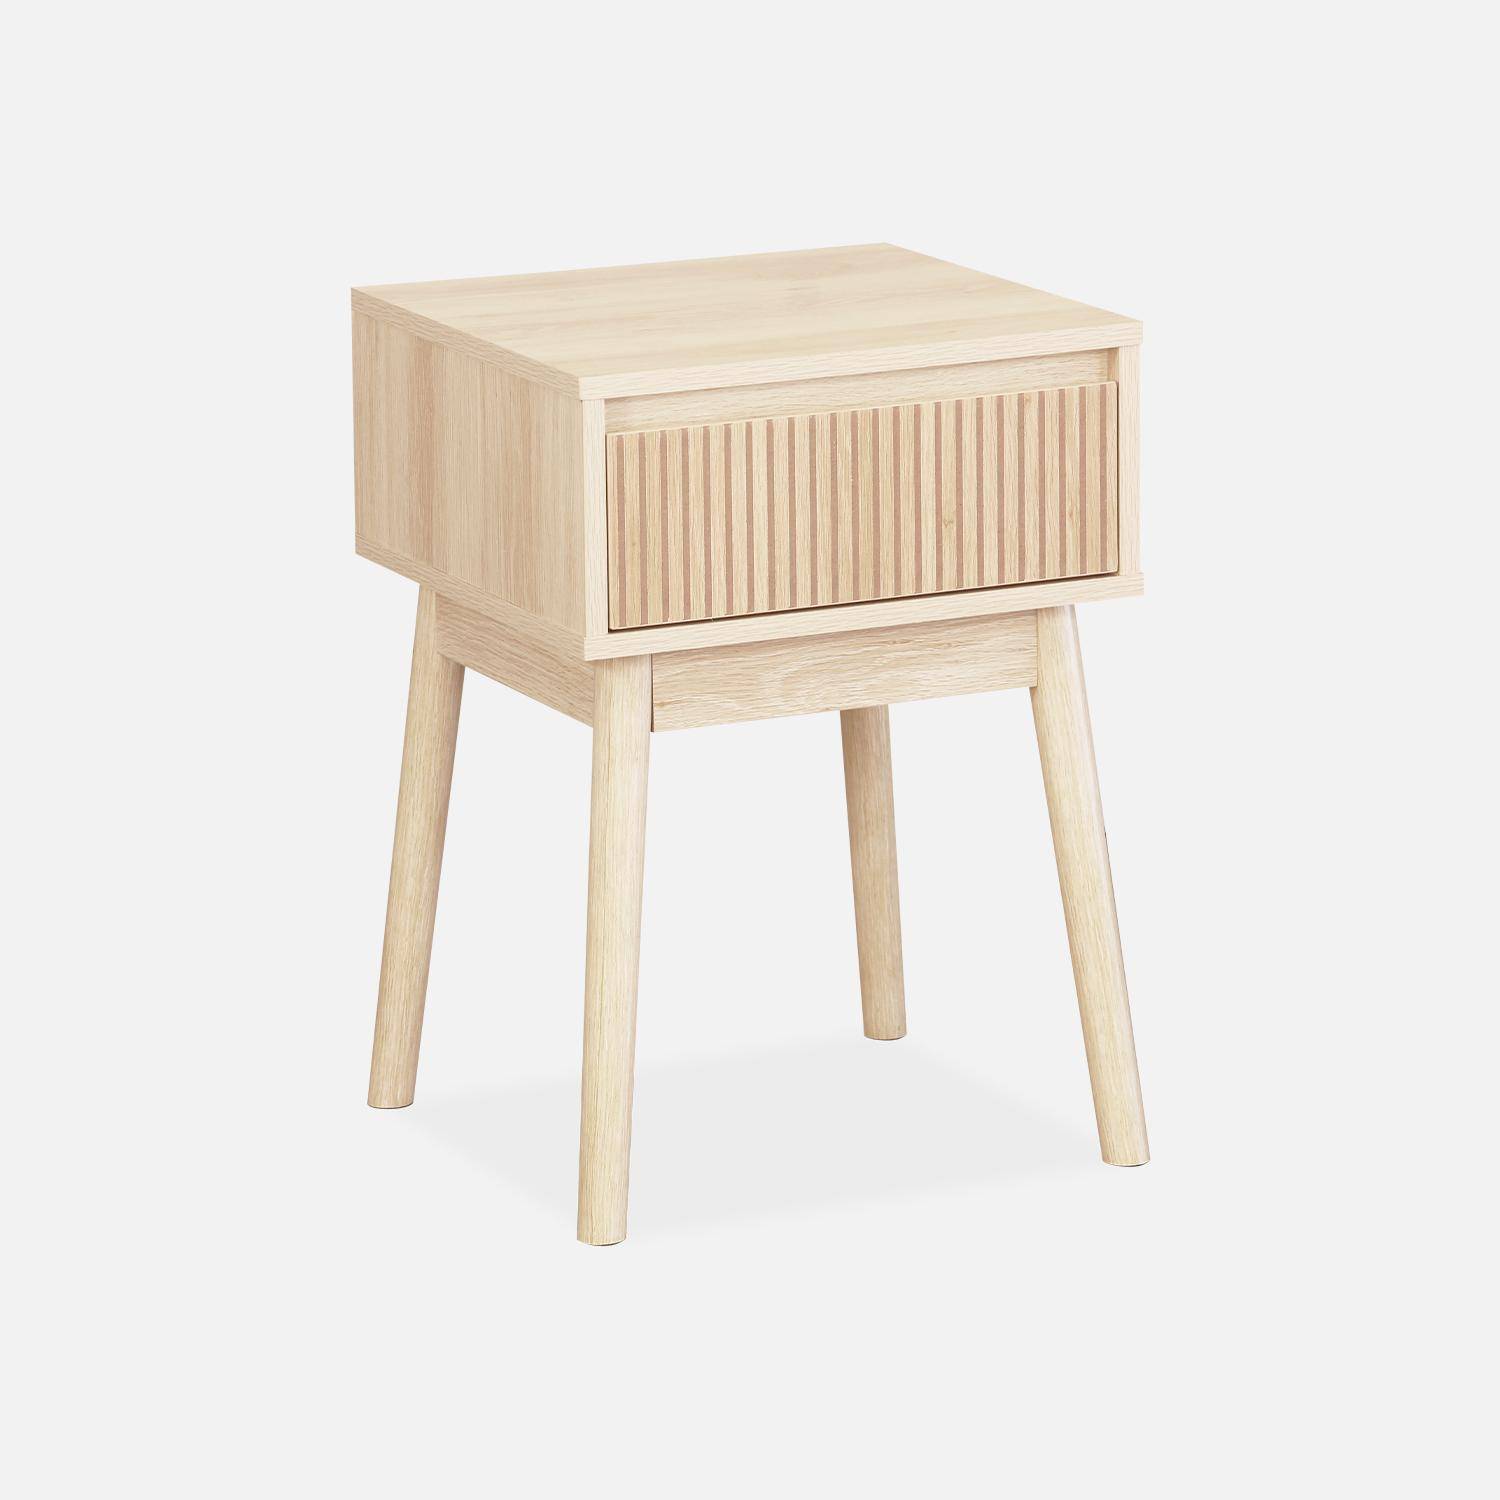 Bedside table with one drawer. Natural colour laminate panels. Fir wood legs.  W 39 x 39 x H 55.4cm LINEAR,sweeek,Photo4